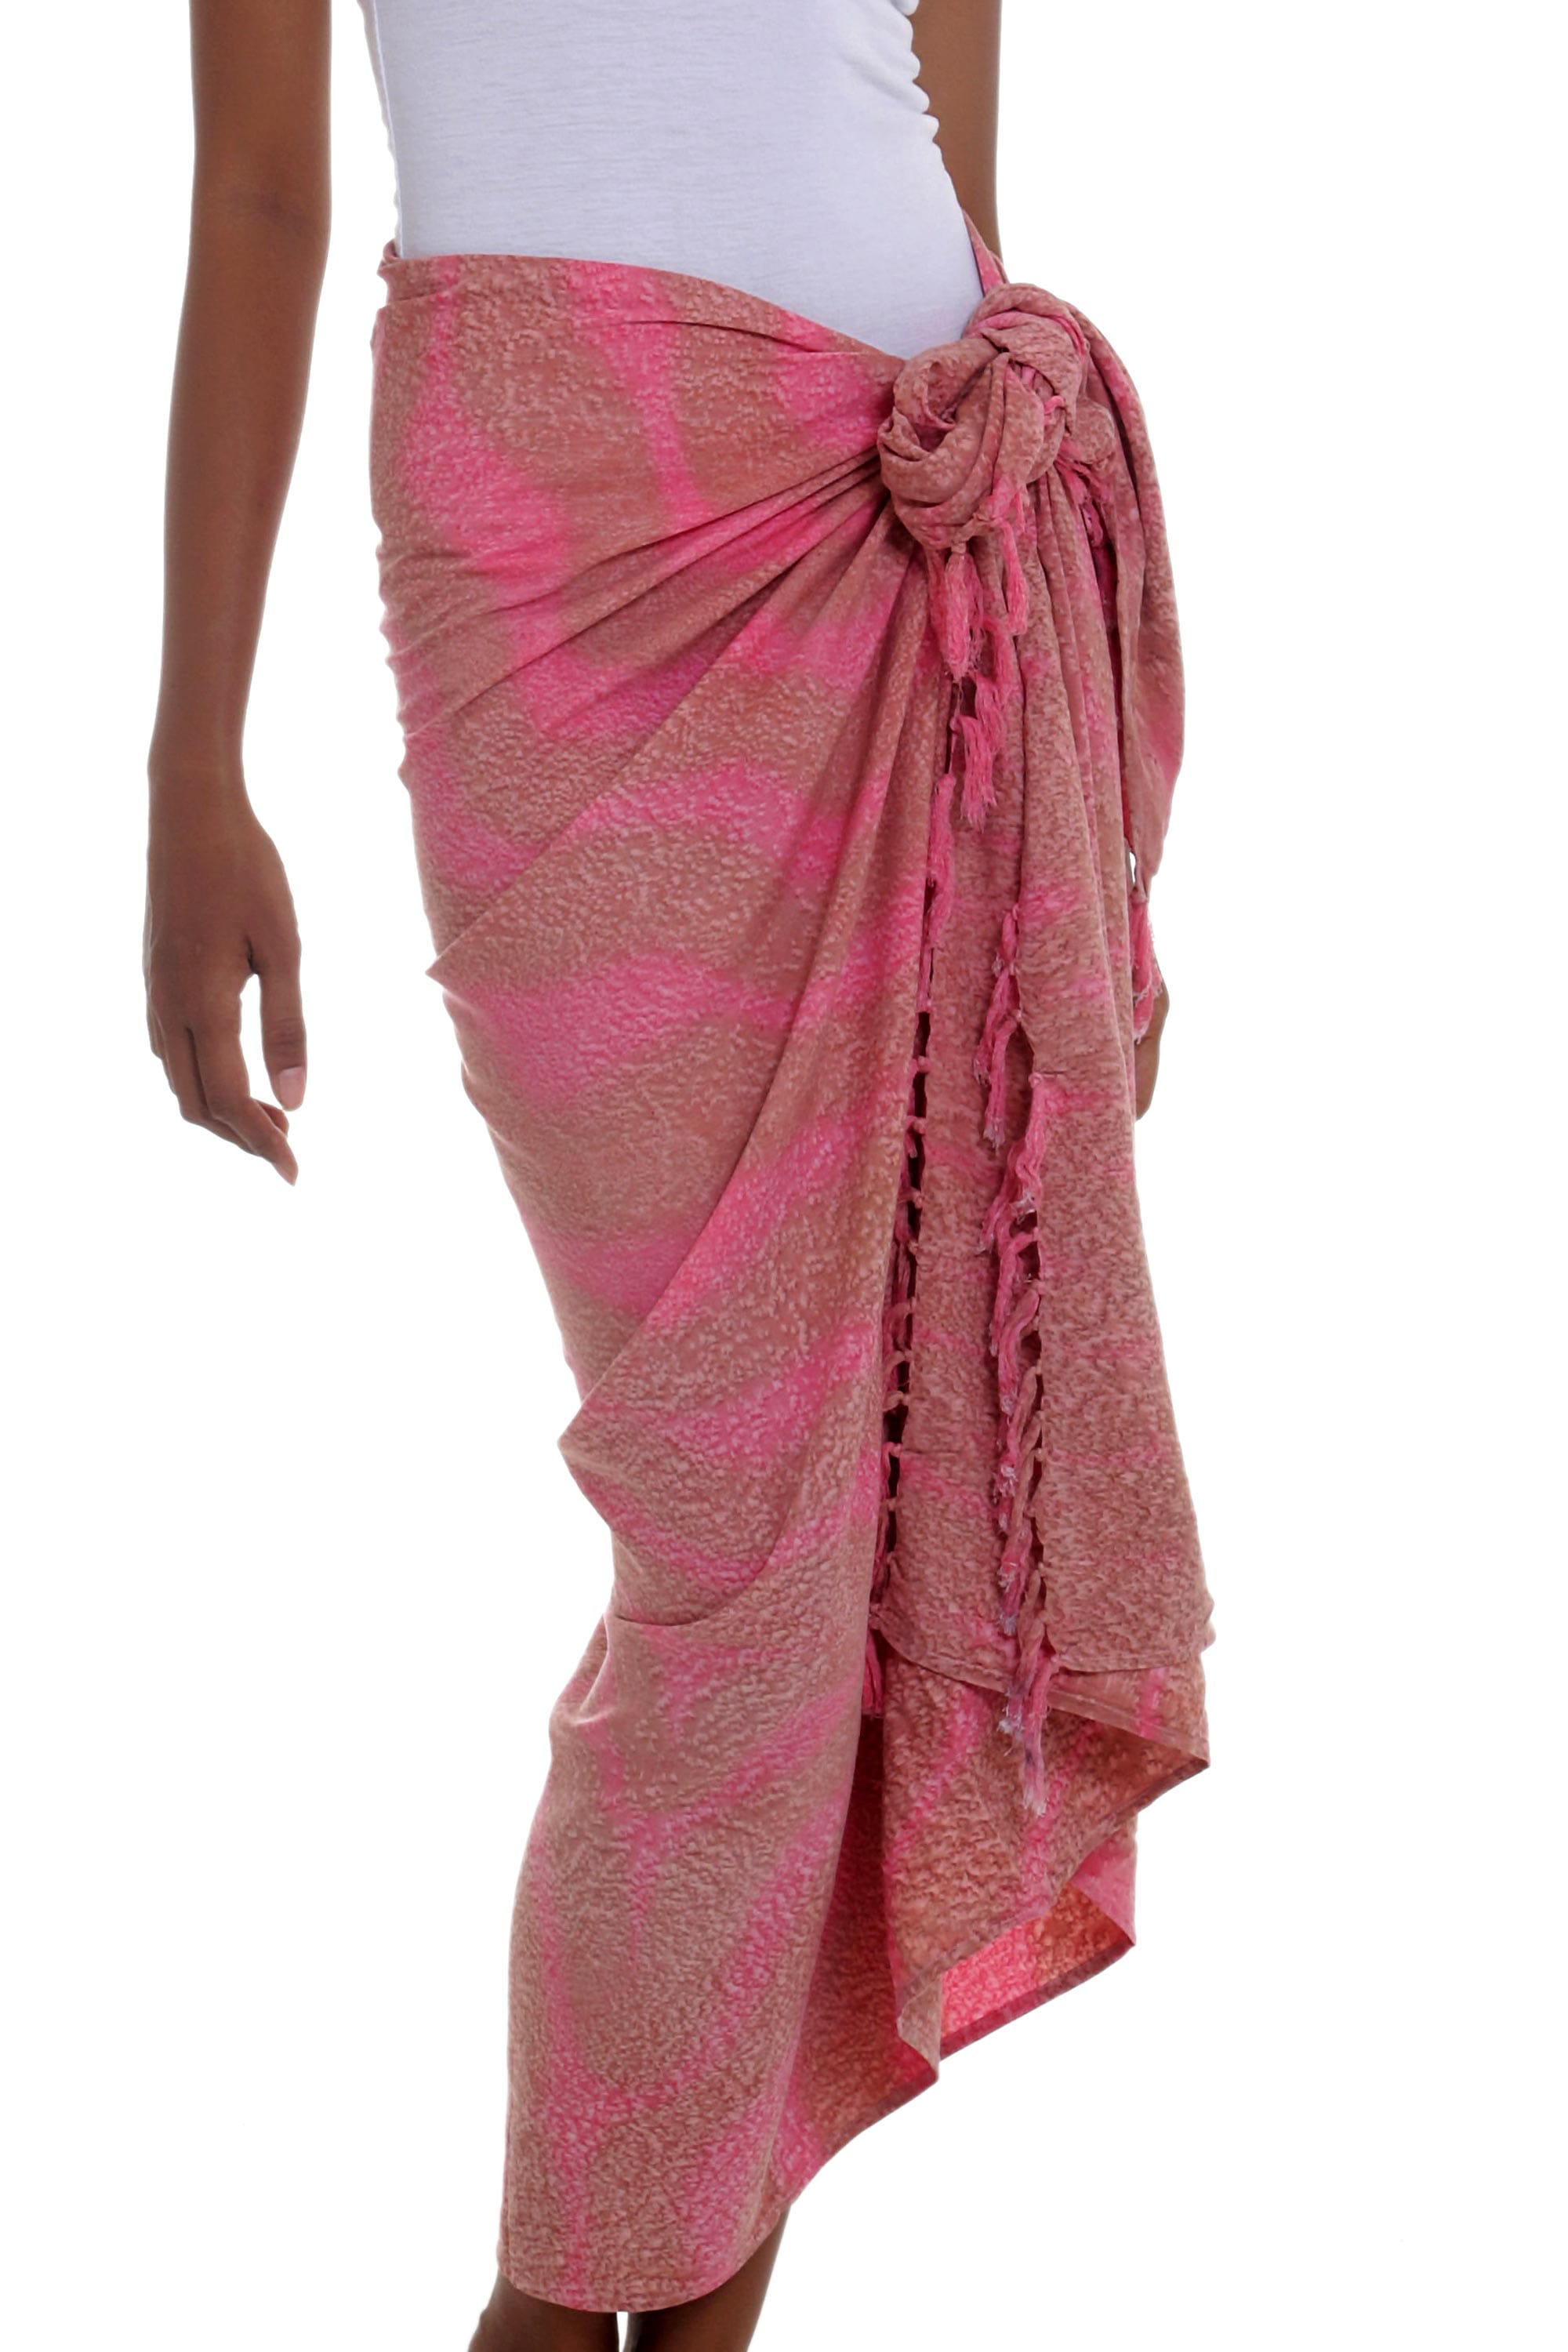 Handmade Pink and Brown Rayon Sarong from Indonesia - Coral Flow – GlobeIn